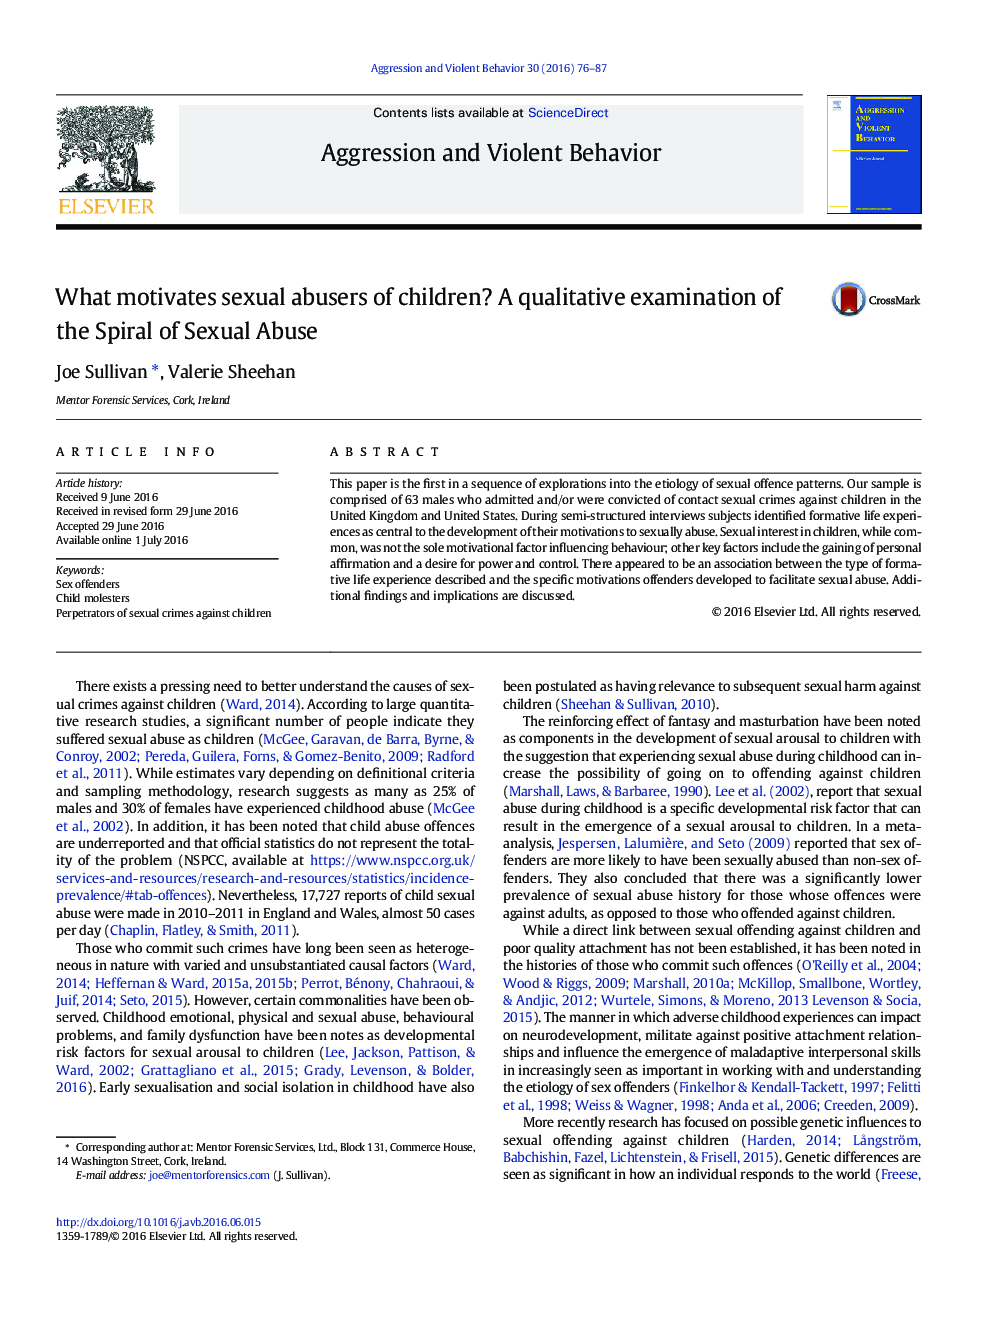 What motivates sexual abusers of children? A qualitative examination of the Spiral of Sexual Abuse